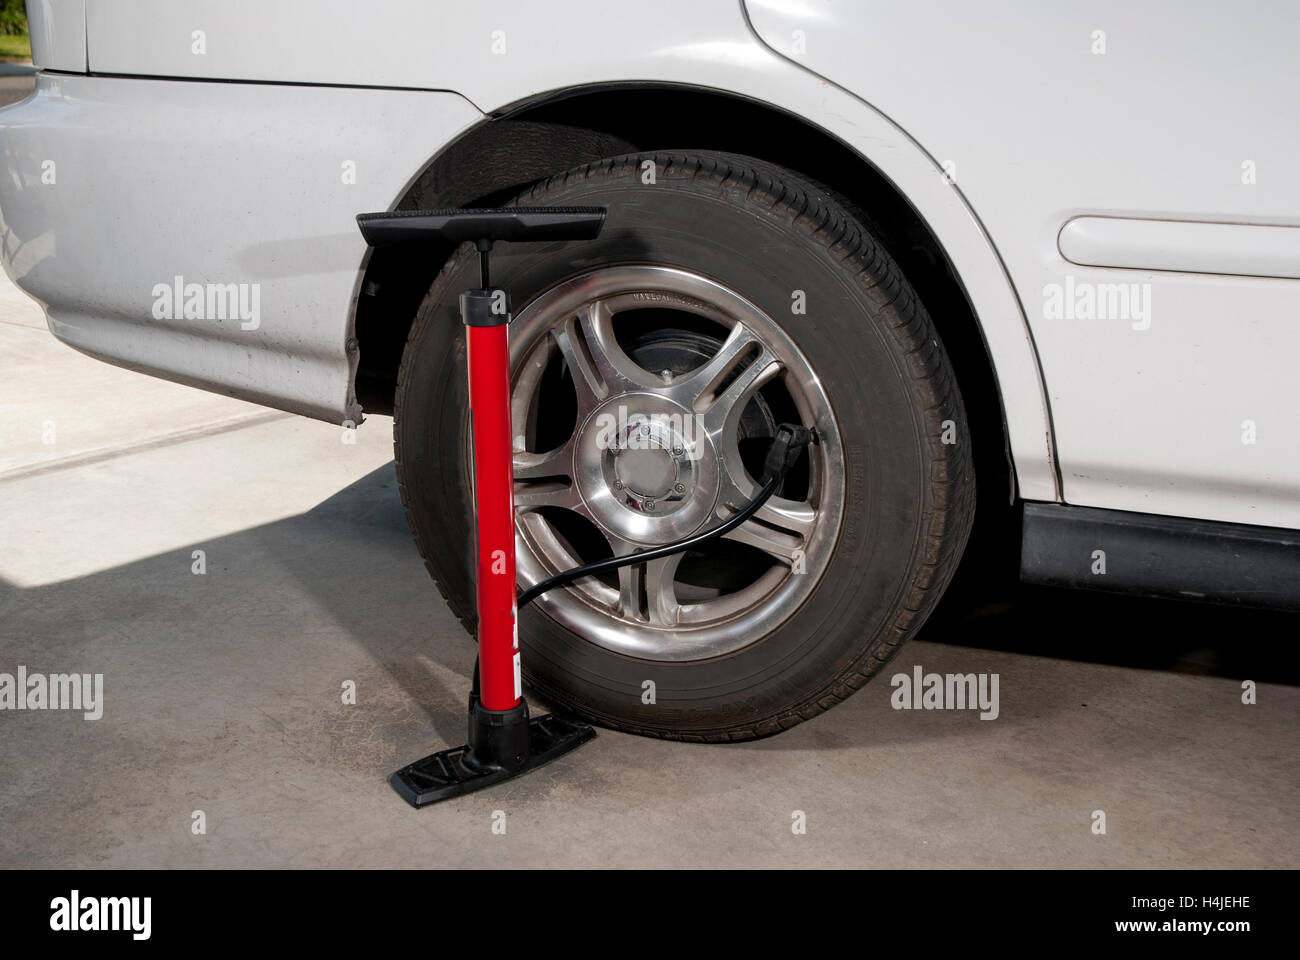 Car tire with bicycle pump hooked up to it Stock Photo